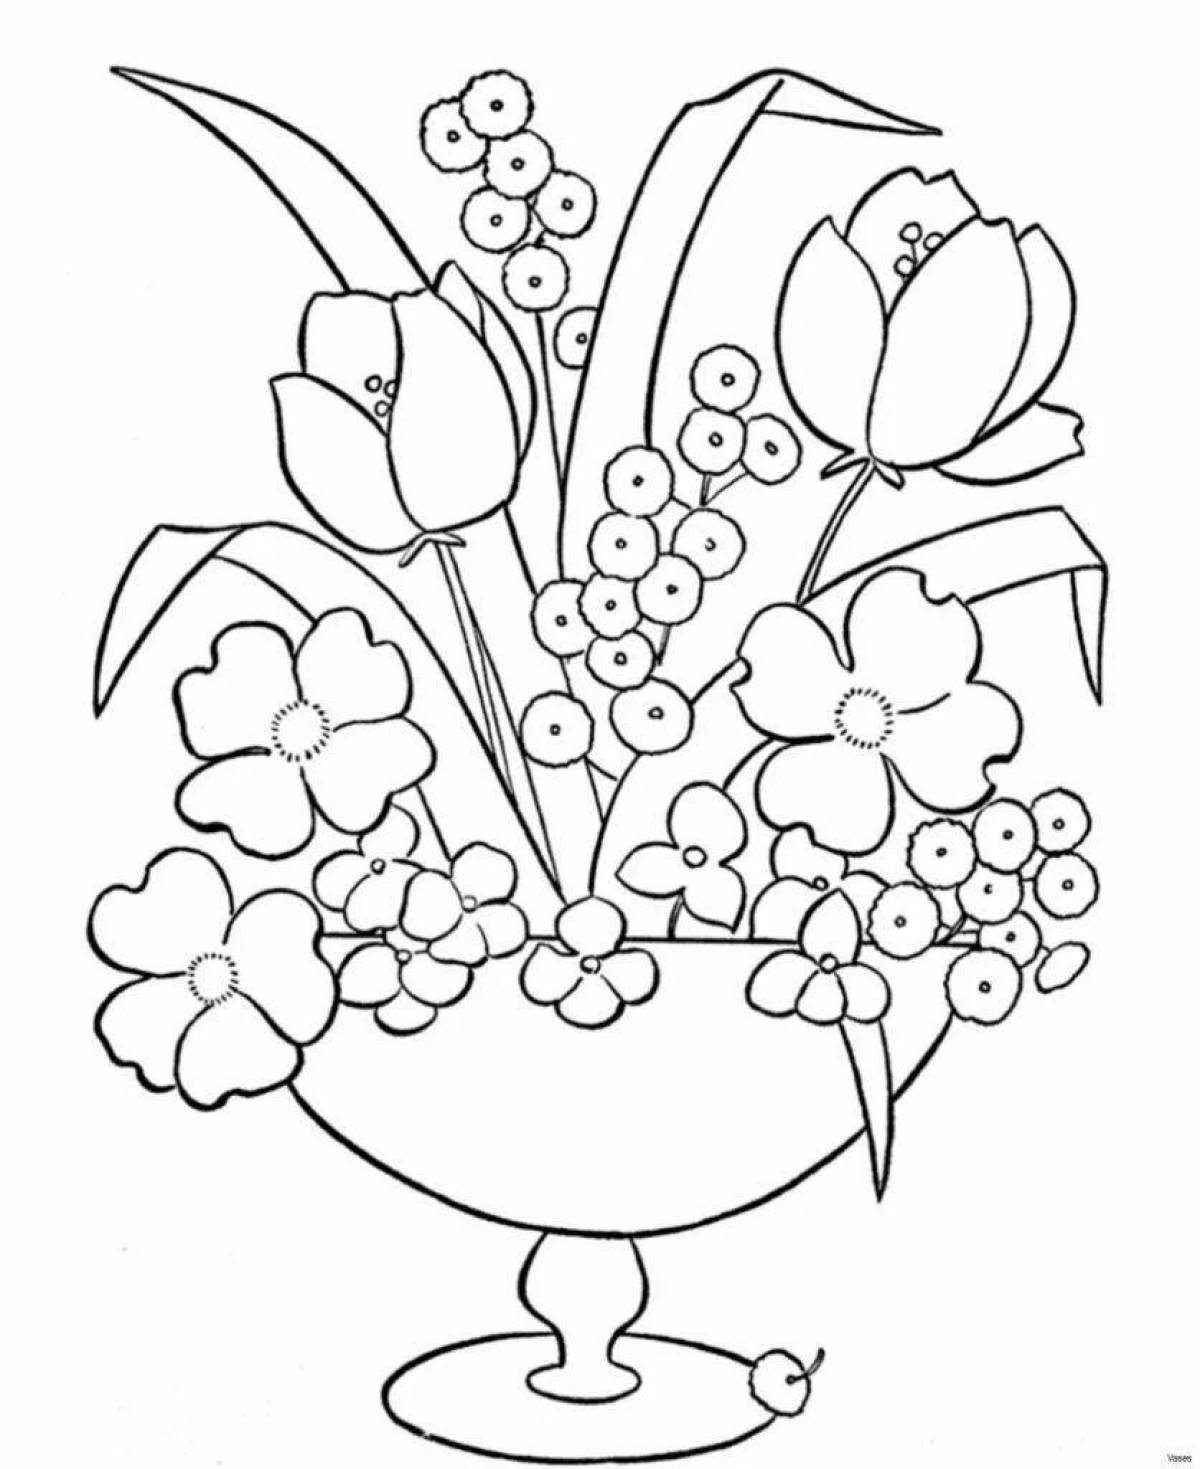 Live coloring book for kids